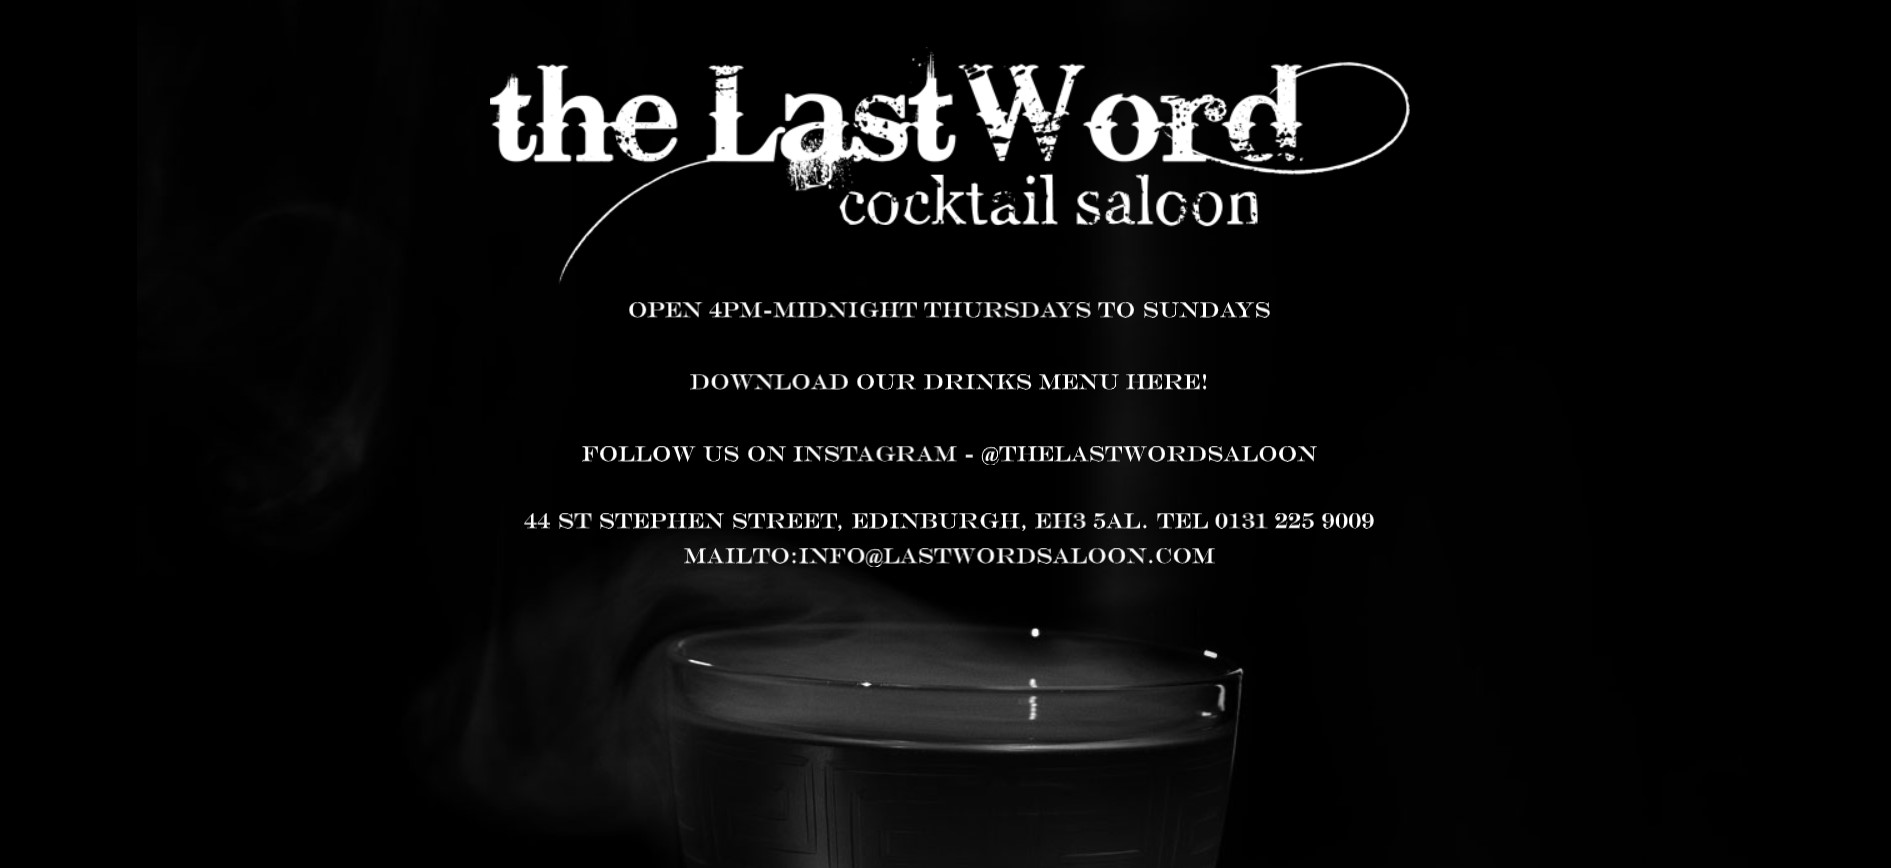 The Last Word Cocktail Saloon